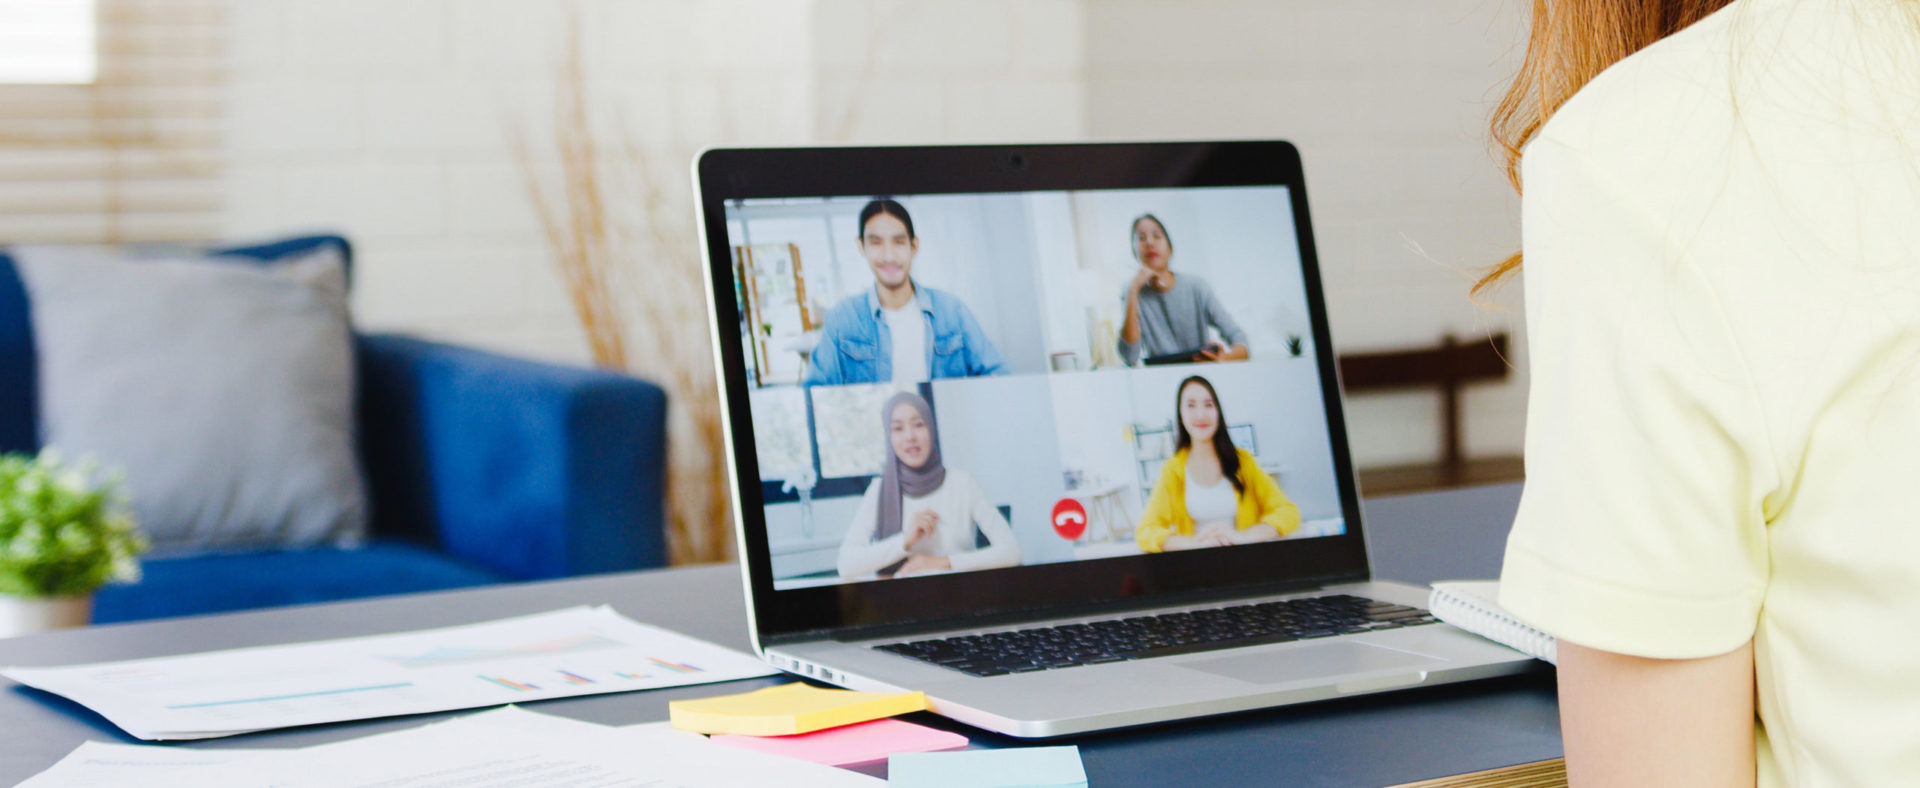 TelWare Introduces HDMeet Video Conferencing Service | TelWare Blog